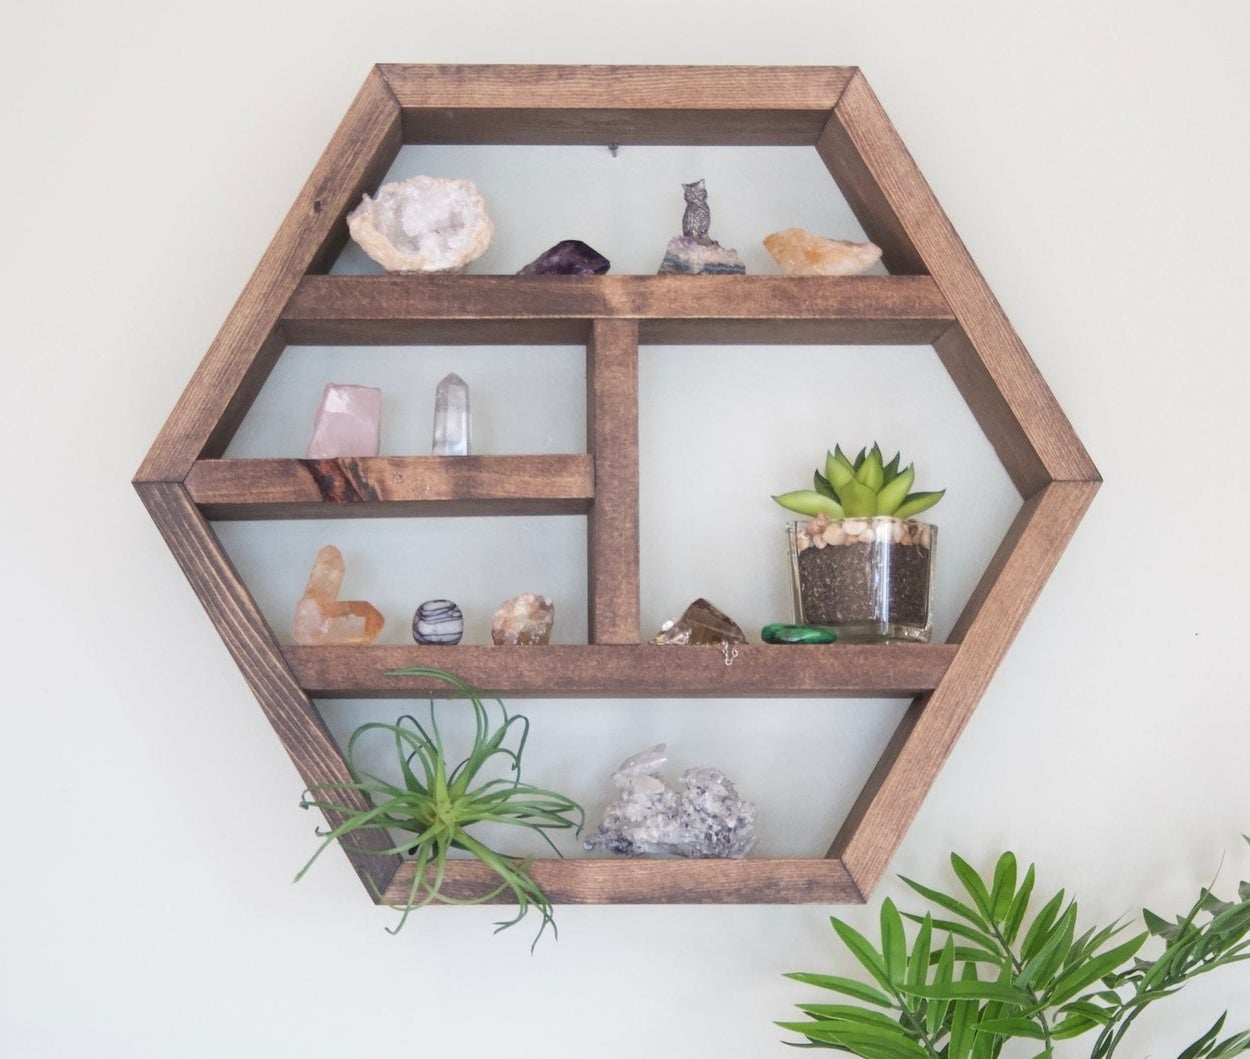 the hexagon shelf holding plants and crystals